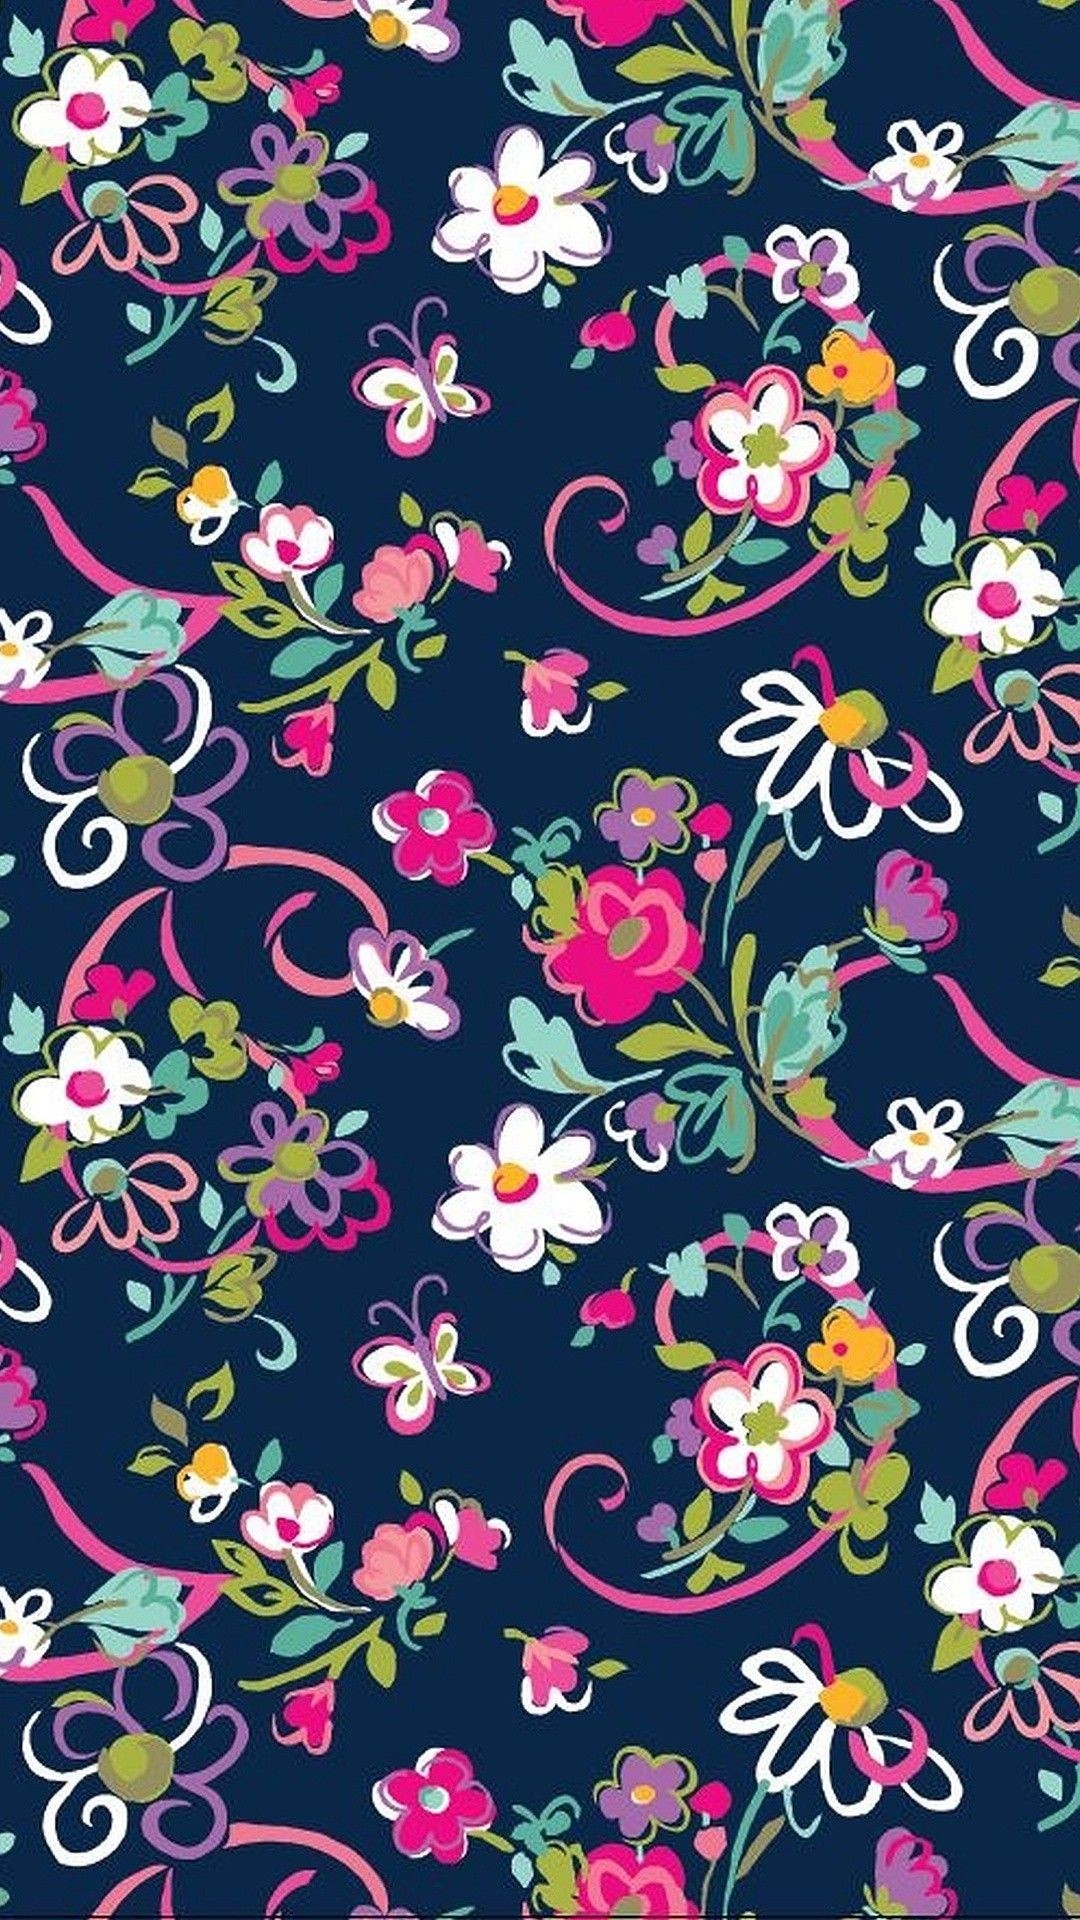 Lilly Pulitzer wallpaper for iPhone